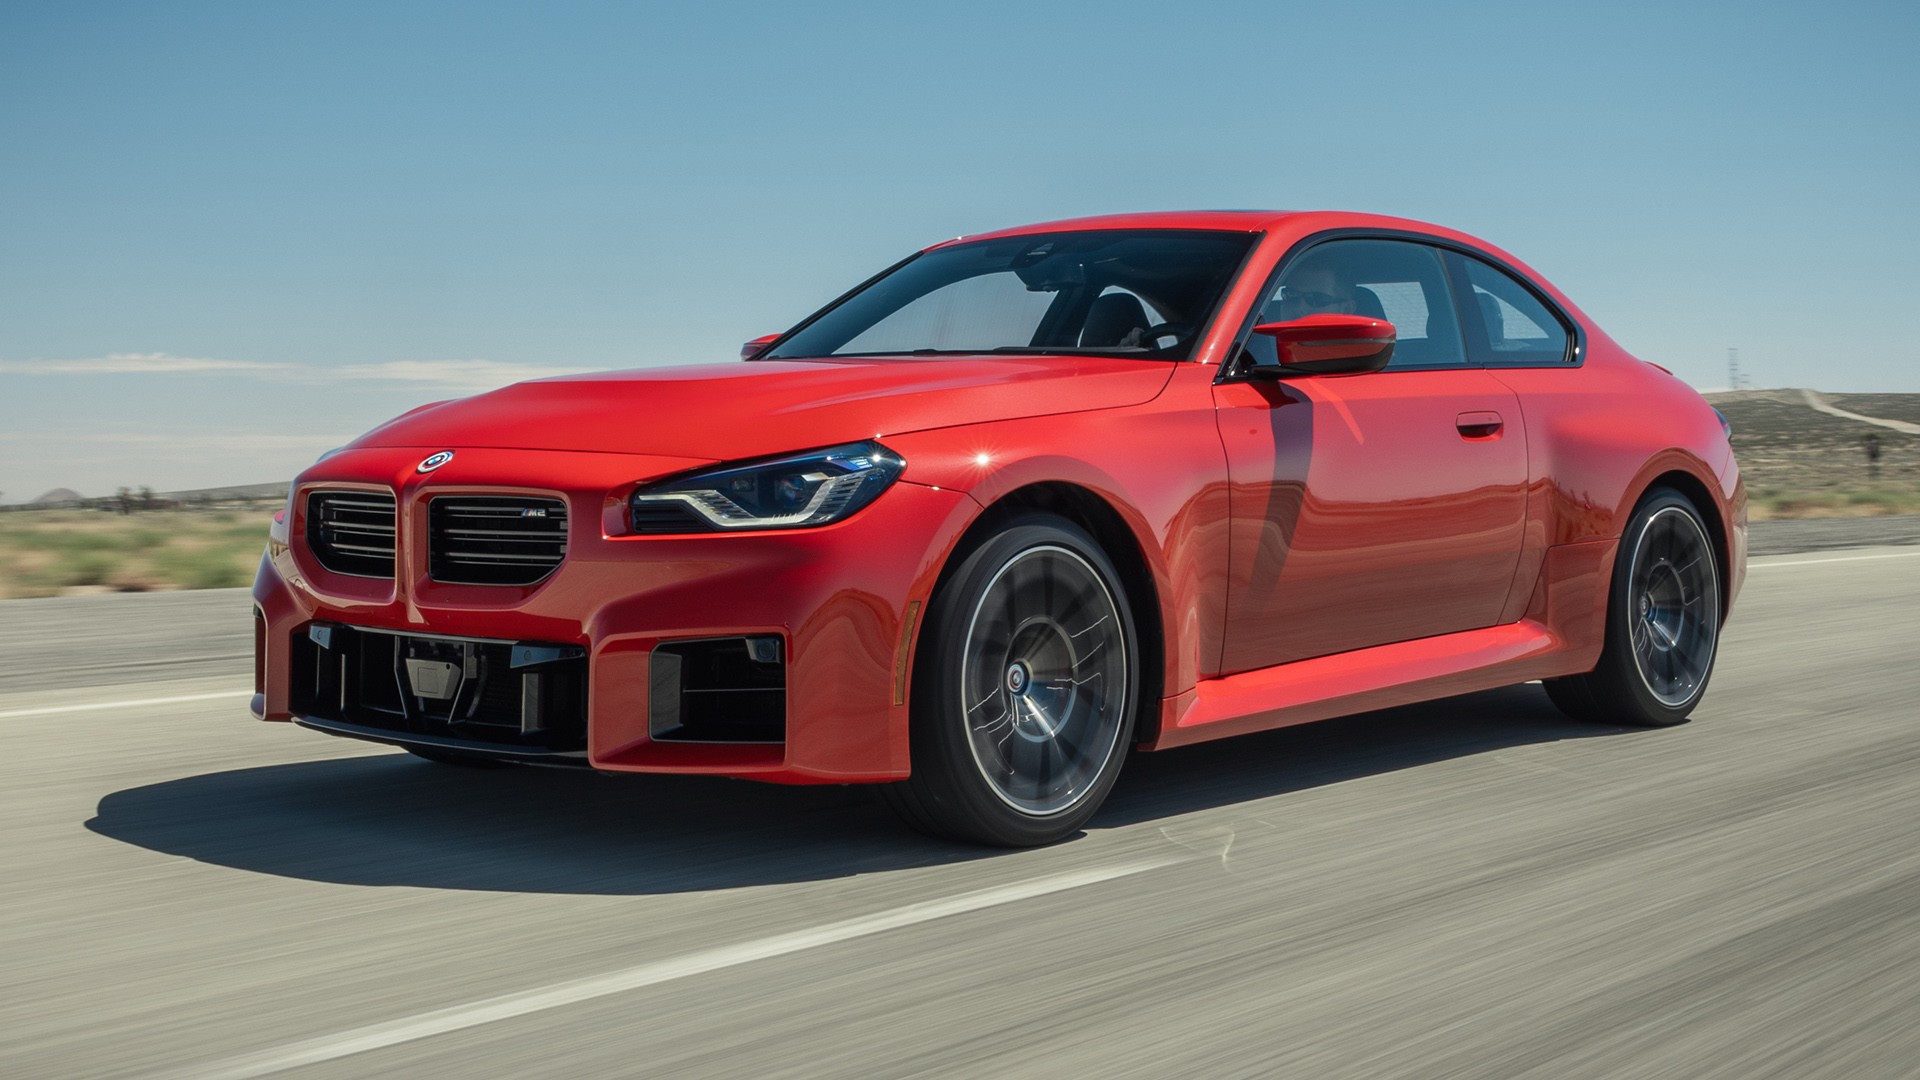 BMW M2 (2016 to 2021), Expert Rating